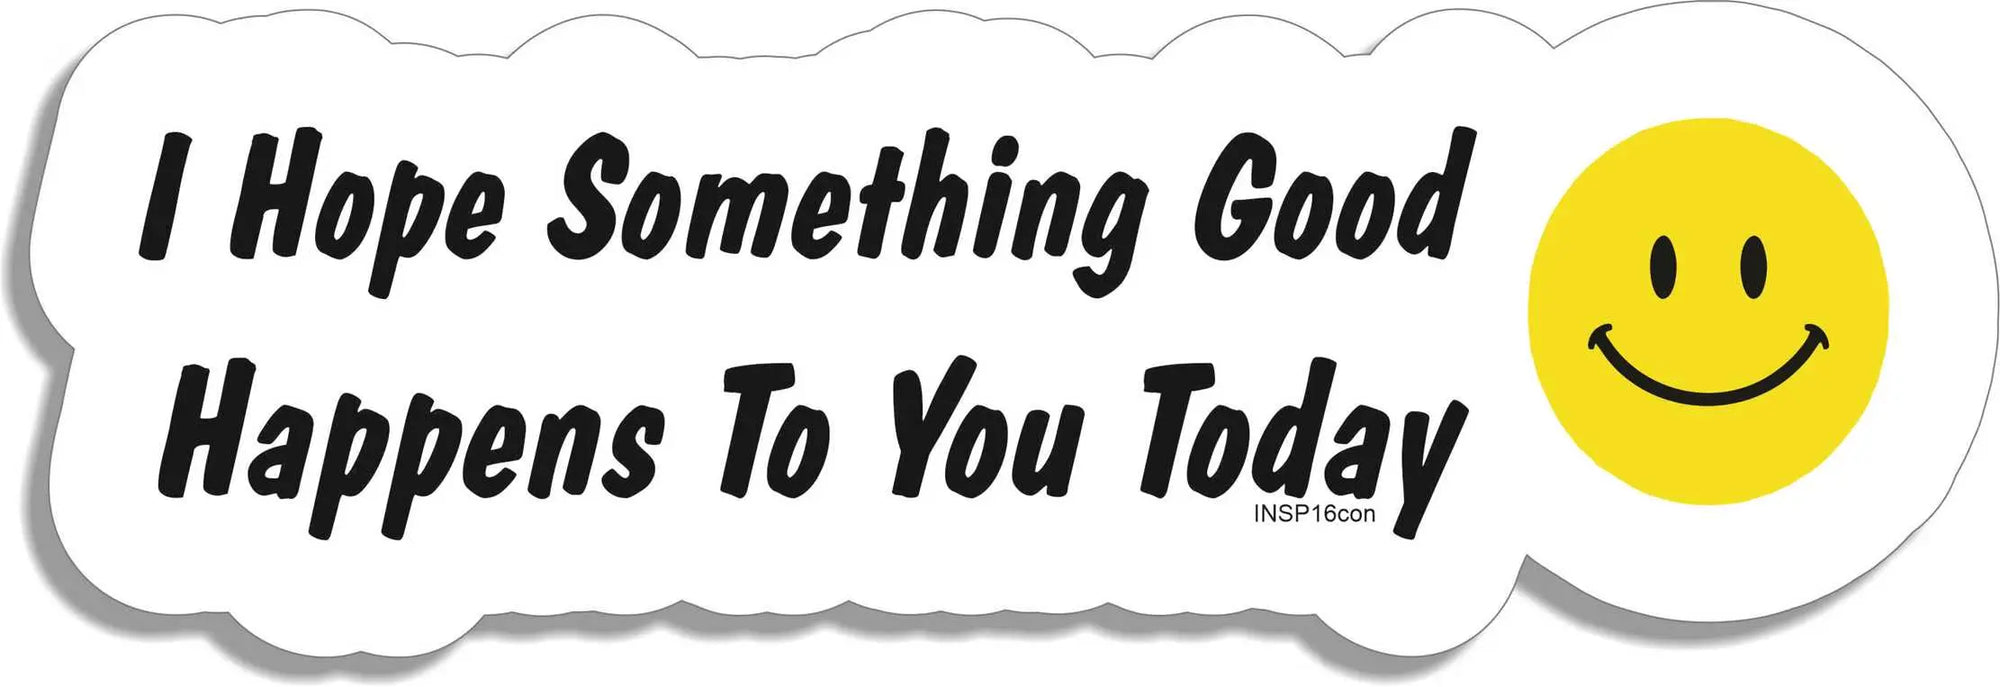 I Hope Something Good Happens To You Today - Motivational Car Stickers, Phone Stickers Humper Bumper